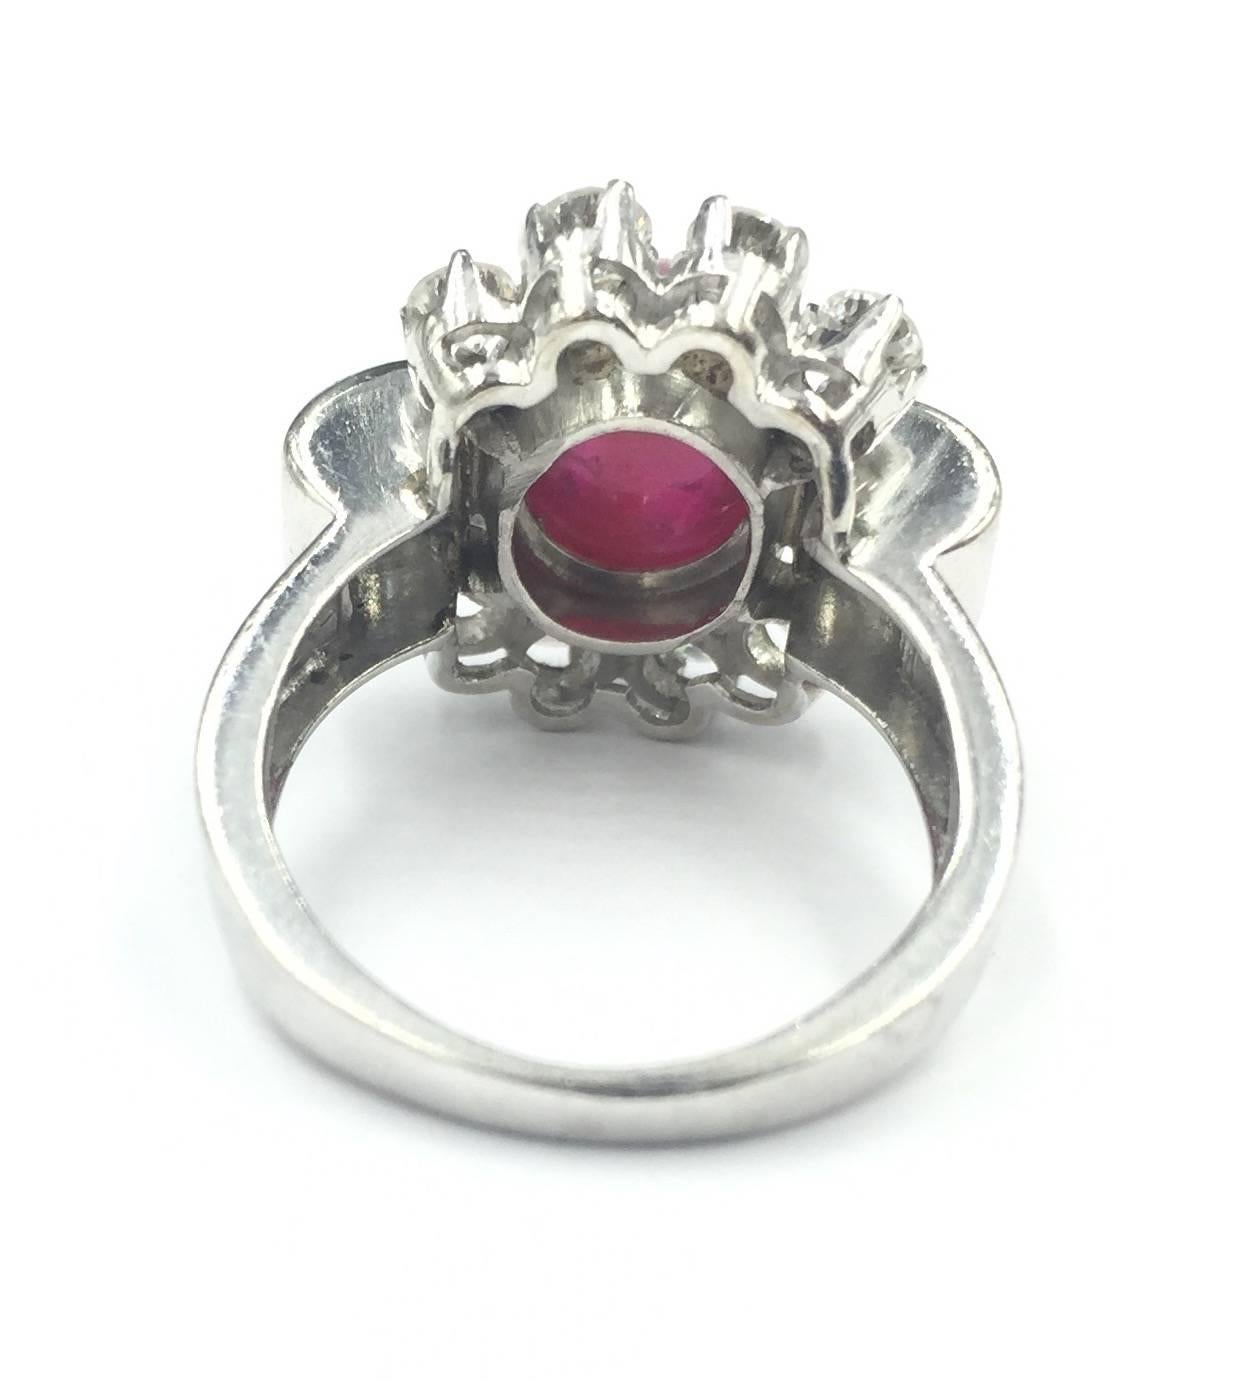  Art Deco 4 Carat Ruby Cabochon & 1.50 Carats of Diamonds in Platinum Ring For Sale 3